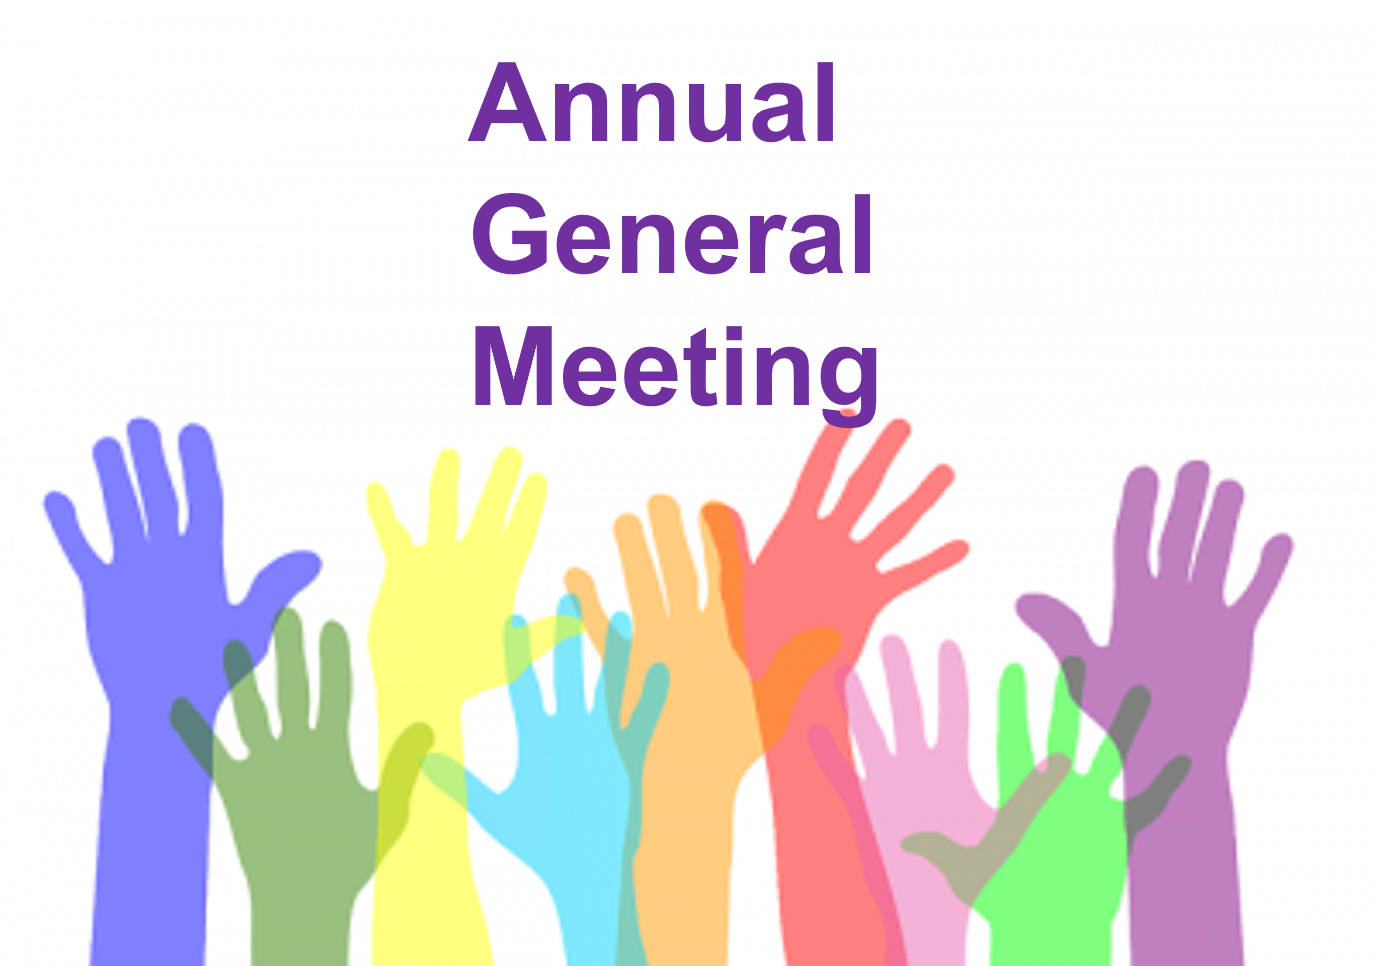 OWNQ Annual General Meeting